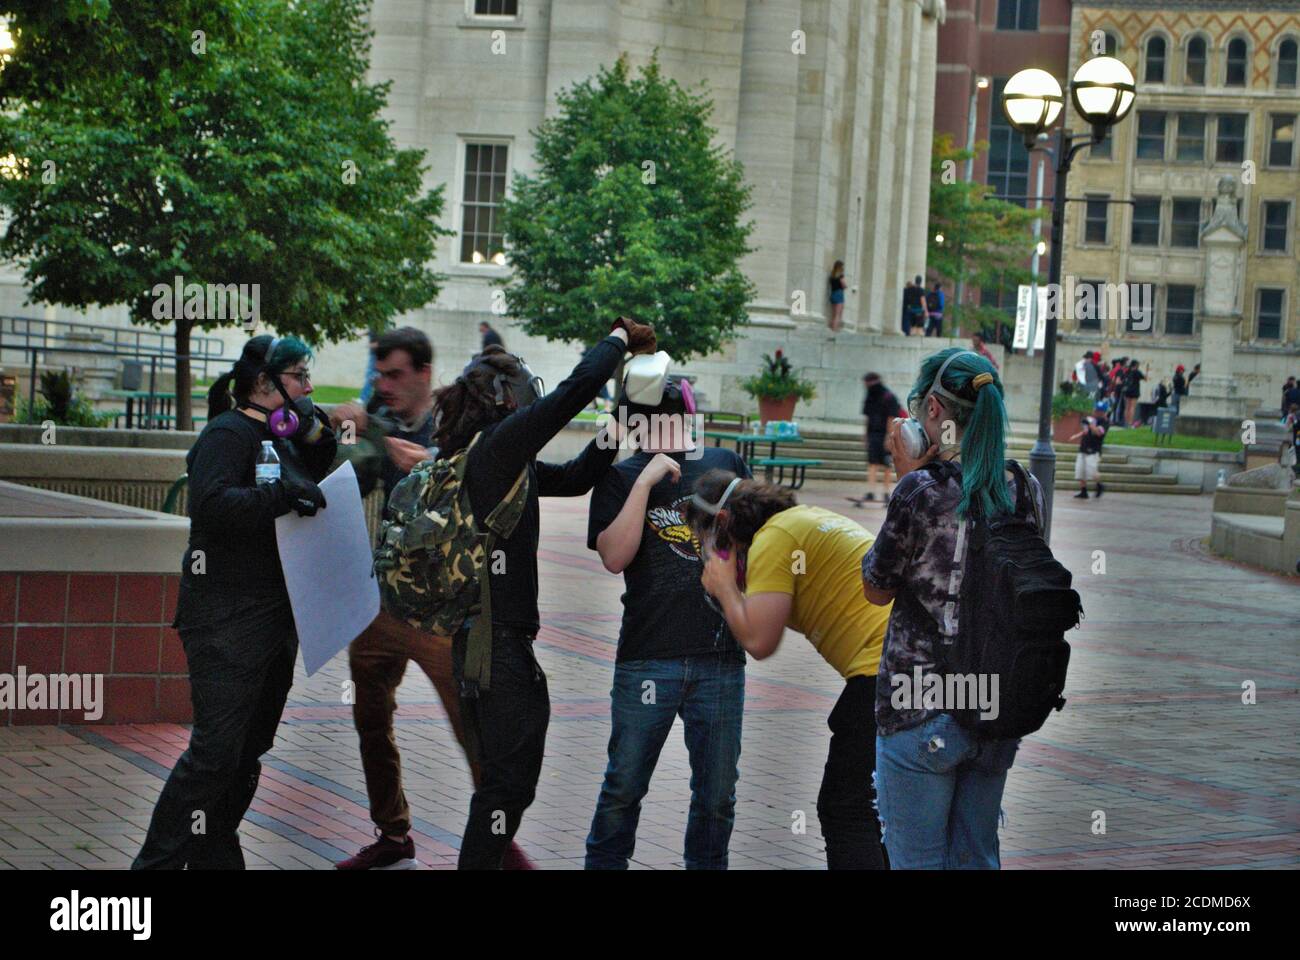 Dayton, Ohio, United States 05/30/2020 protesters at a black lives matter rally after being sprayed with   pepper spray Stock Photo